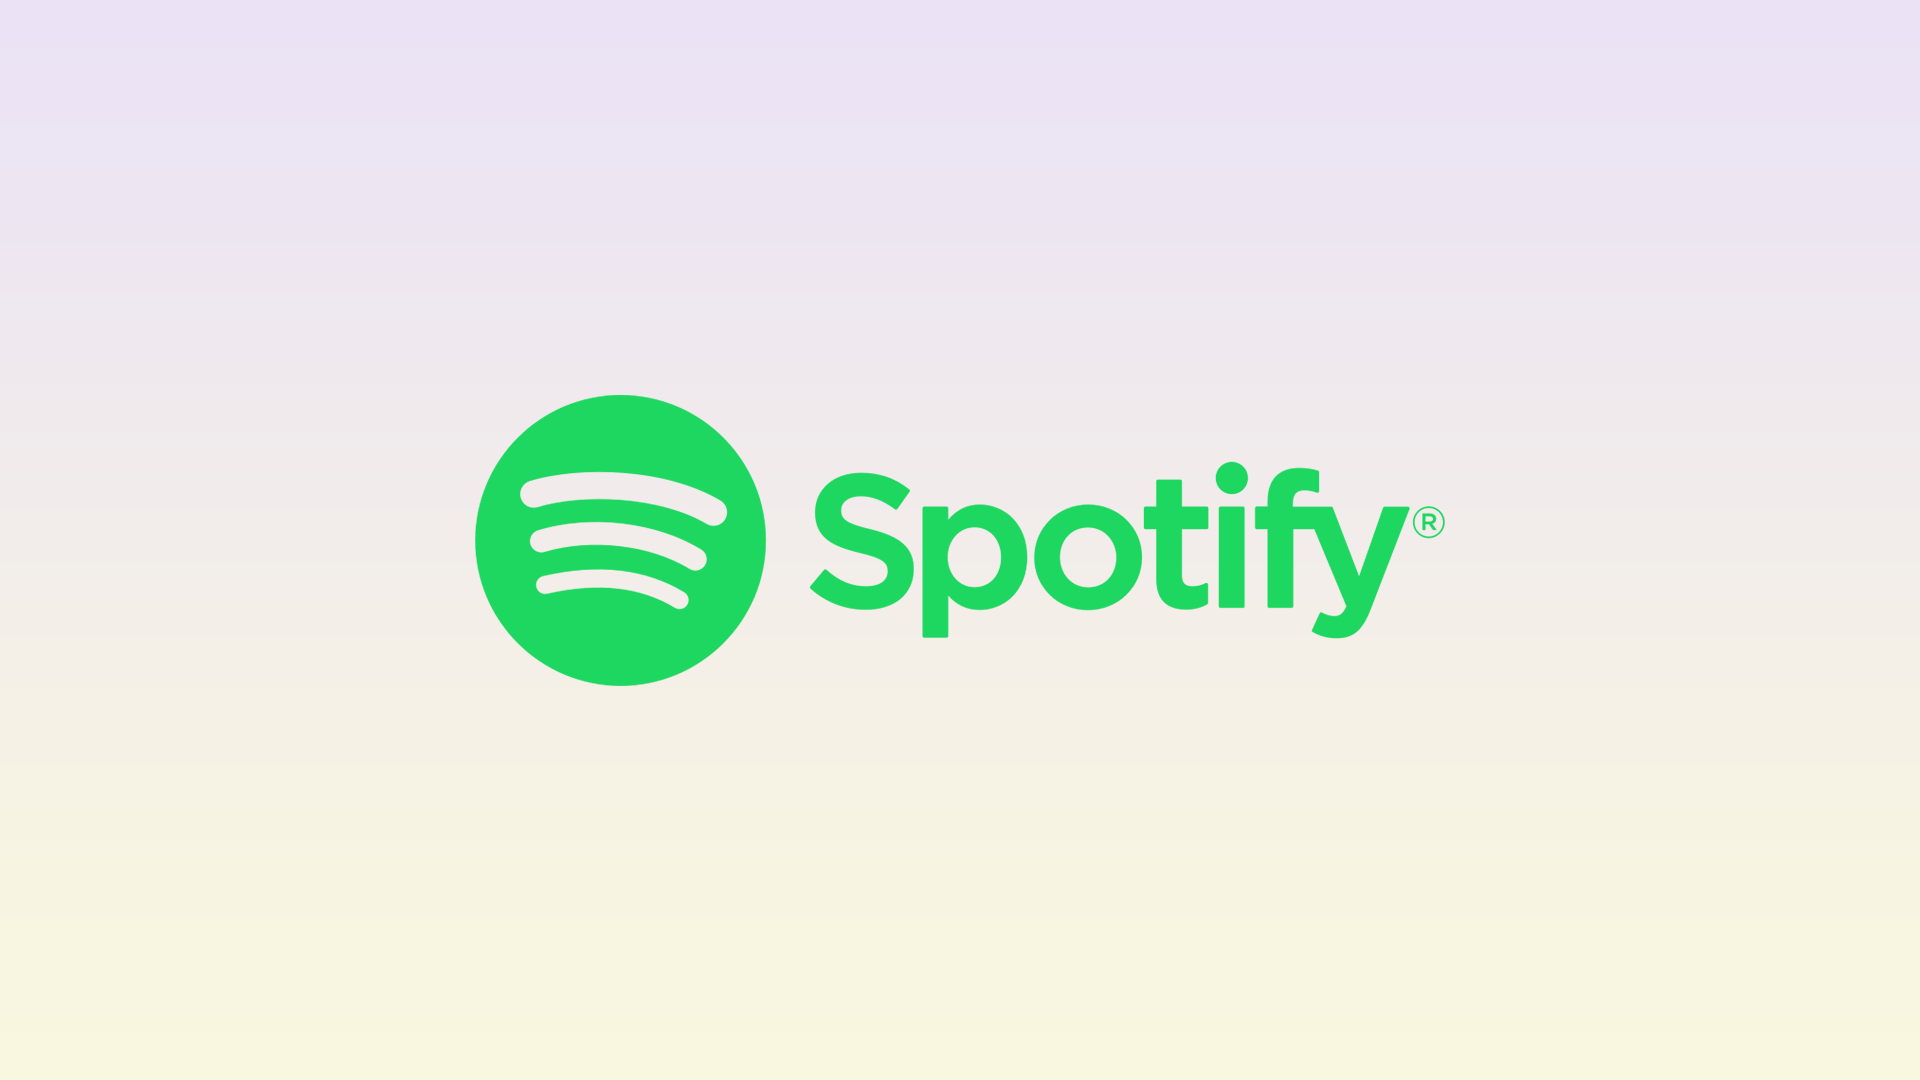 How to post Spotify lyrics to social networks